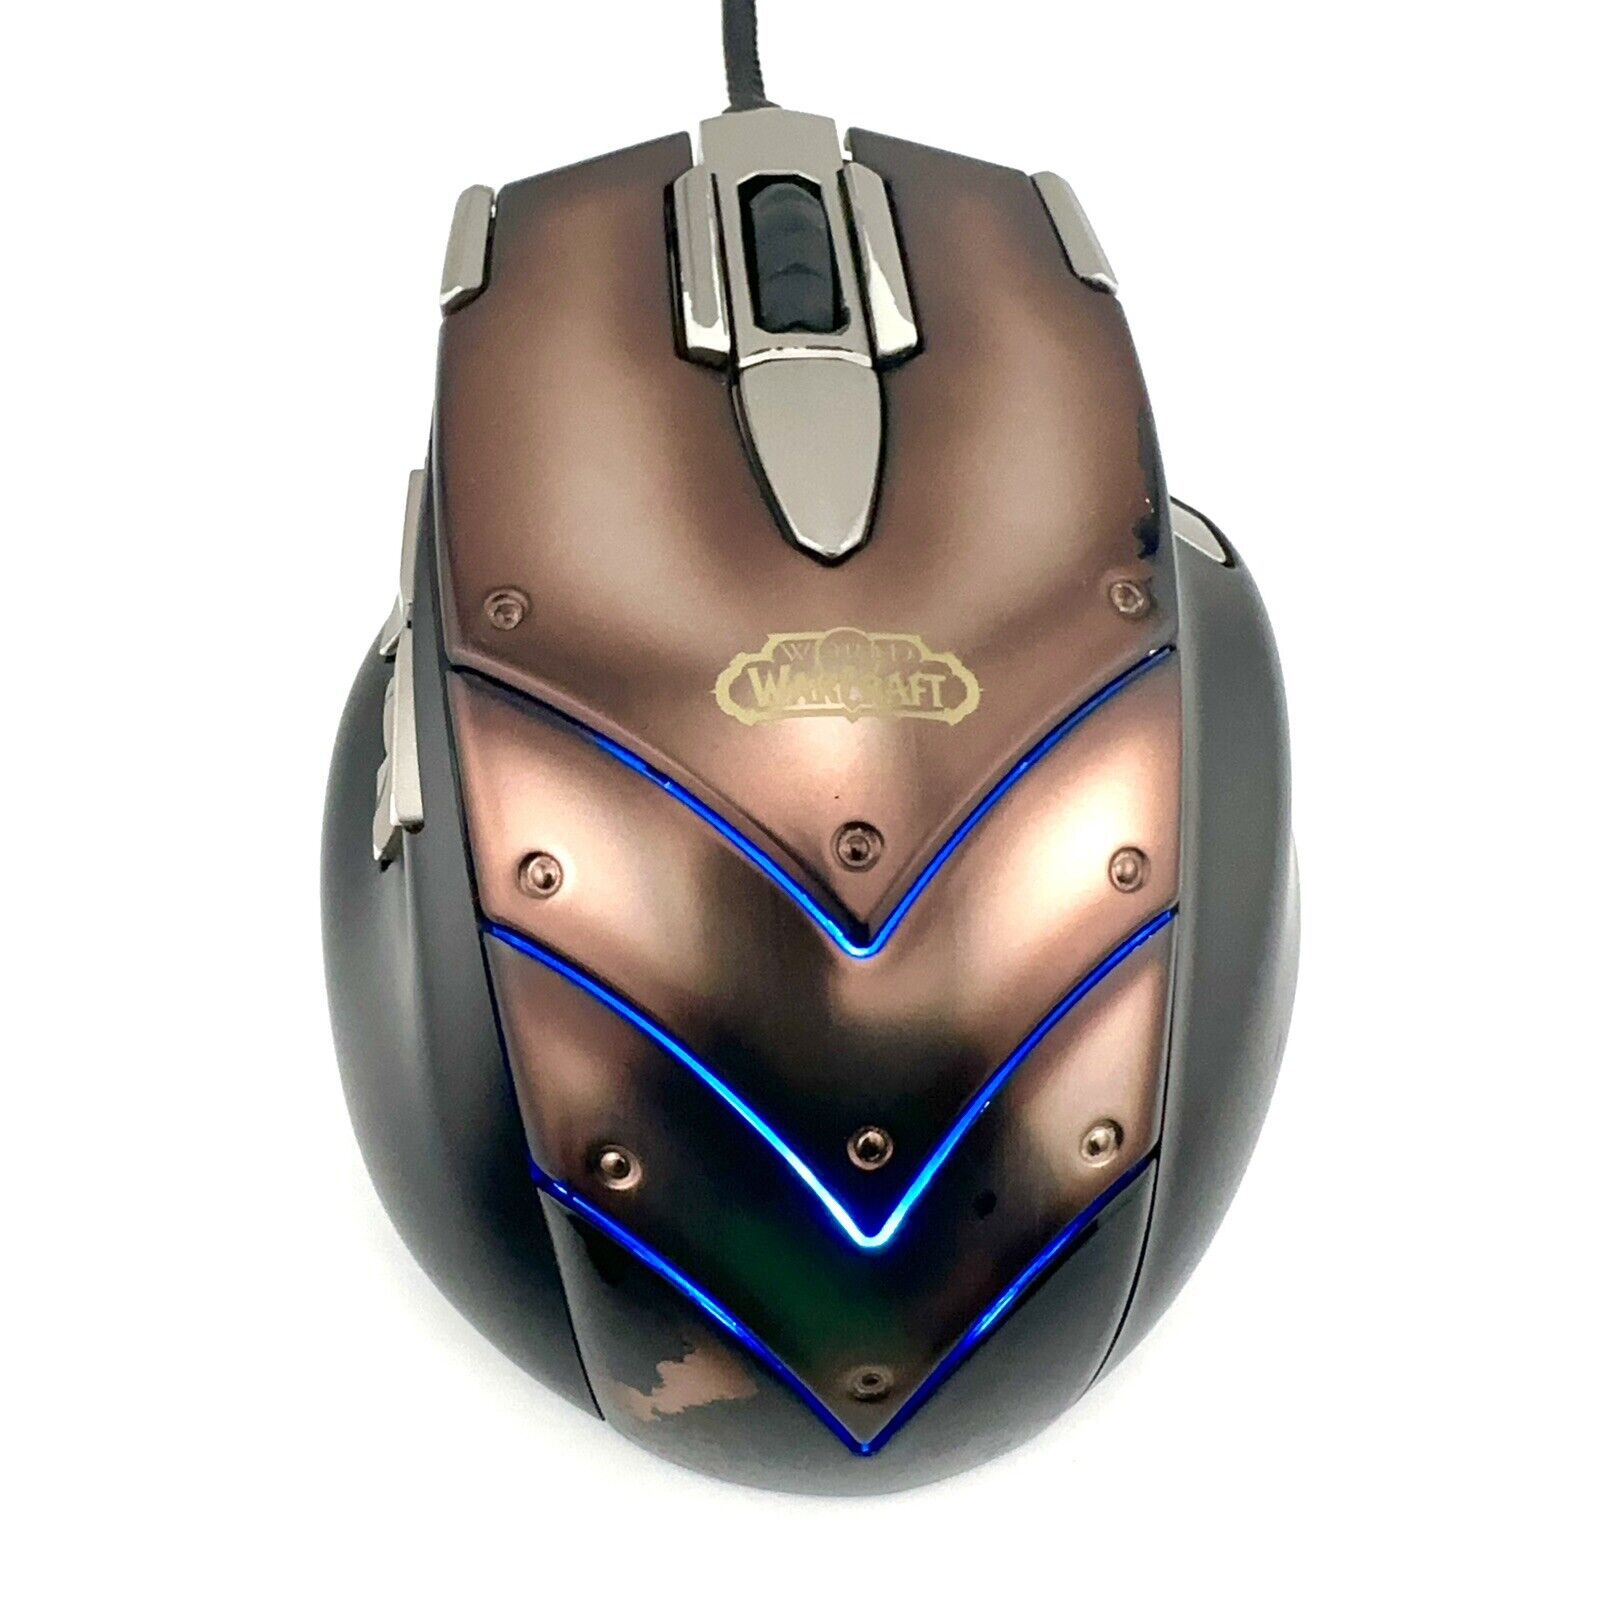 SteelSeries World of Warcraft WOW Cataclysm MMO Gaming Mouse